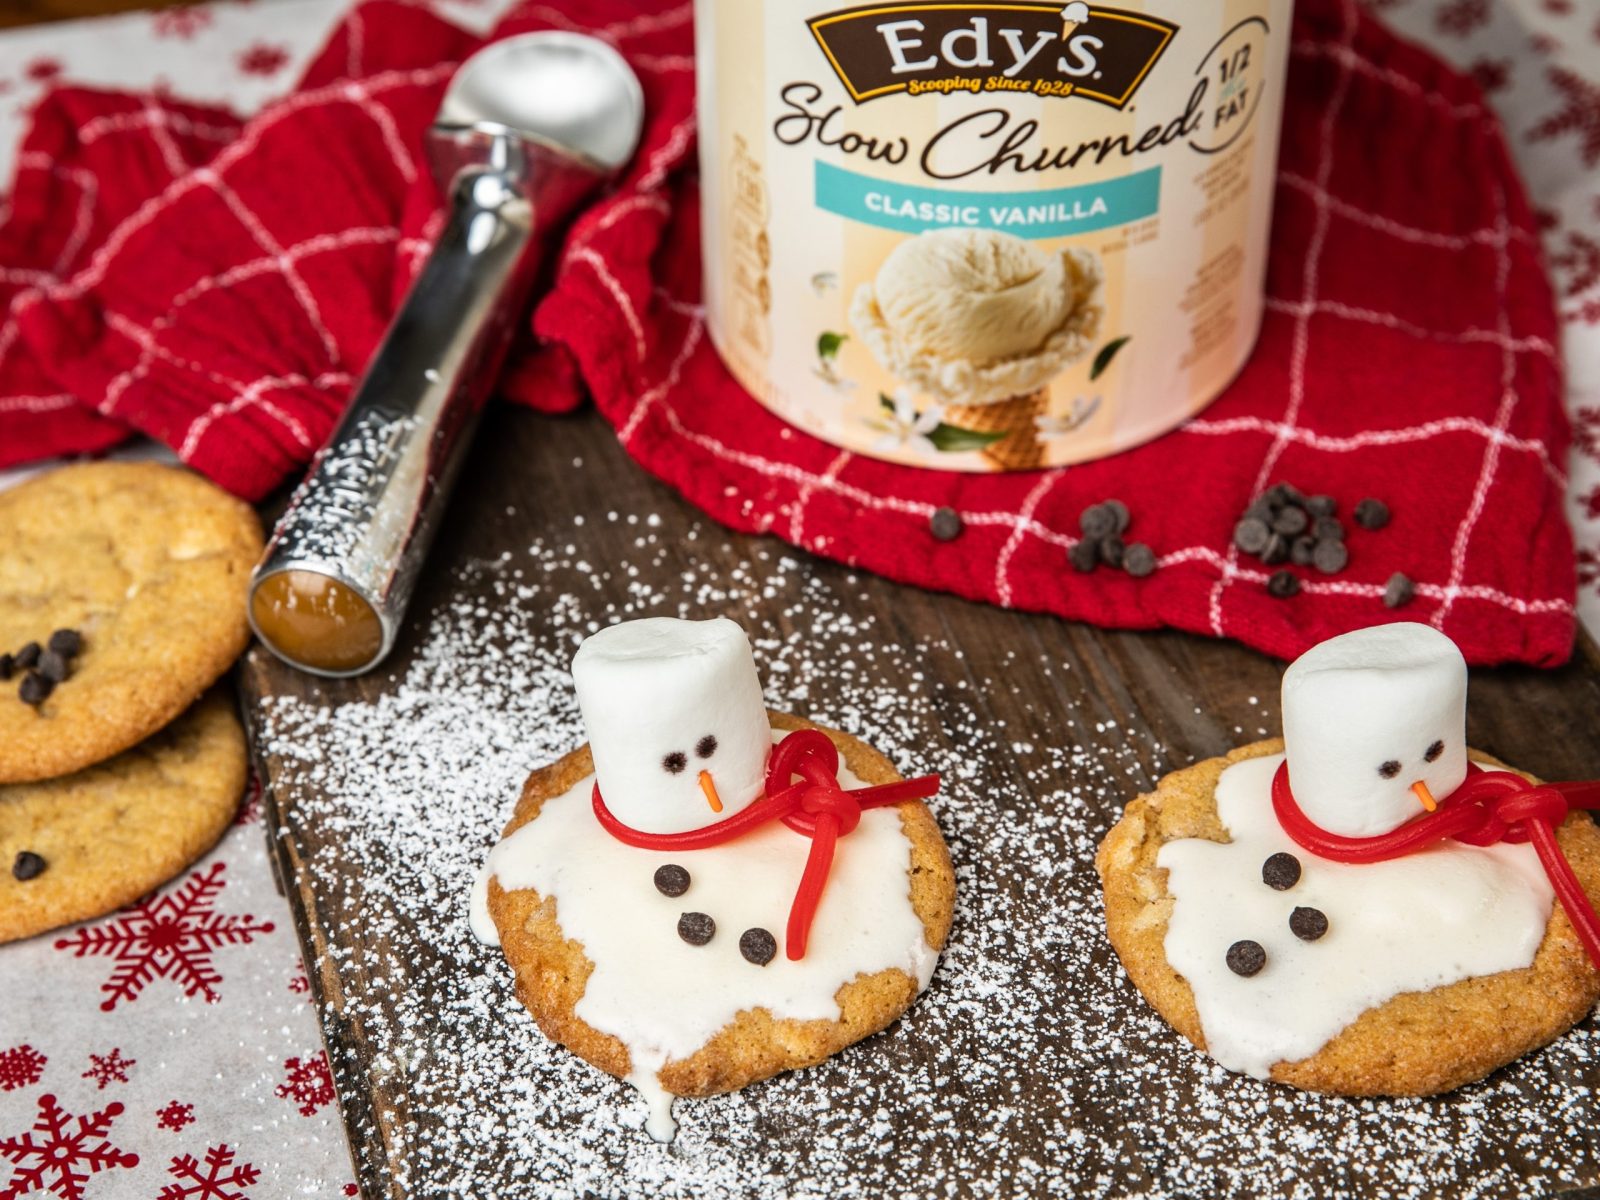 Serve Up Some Holiday Fun With These Edy’s® Melting Snowman Frosted Cookies